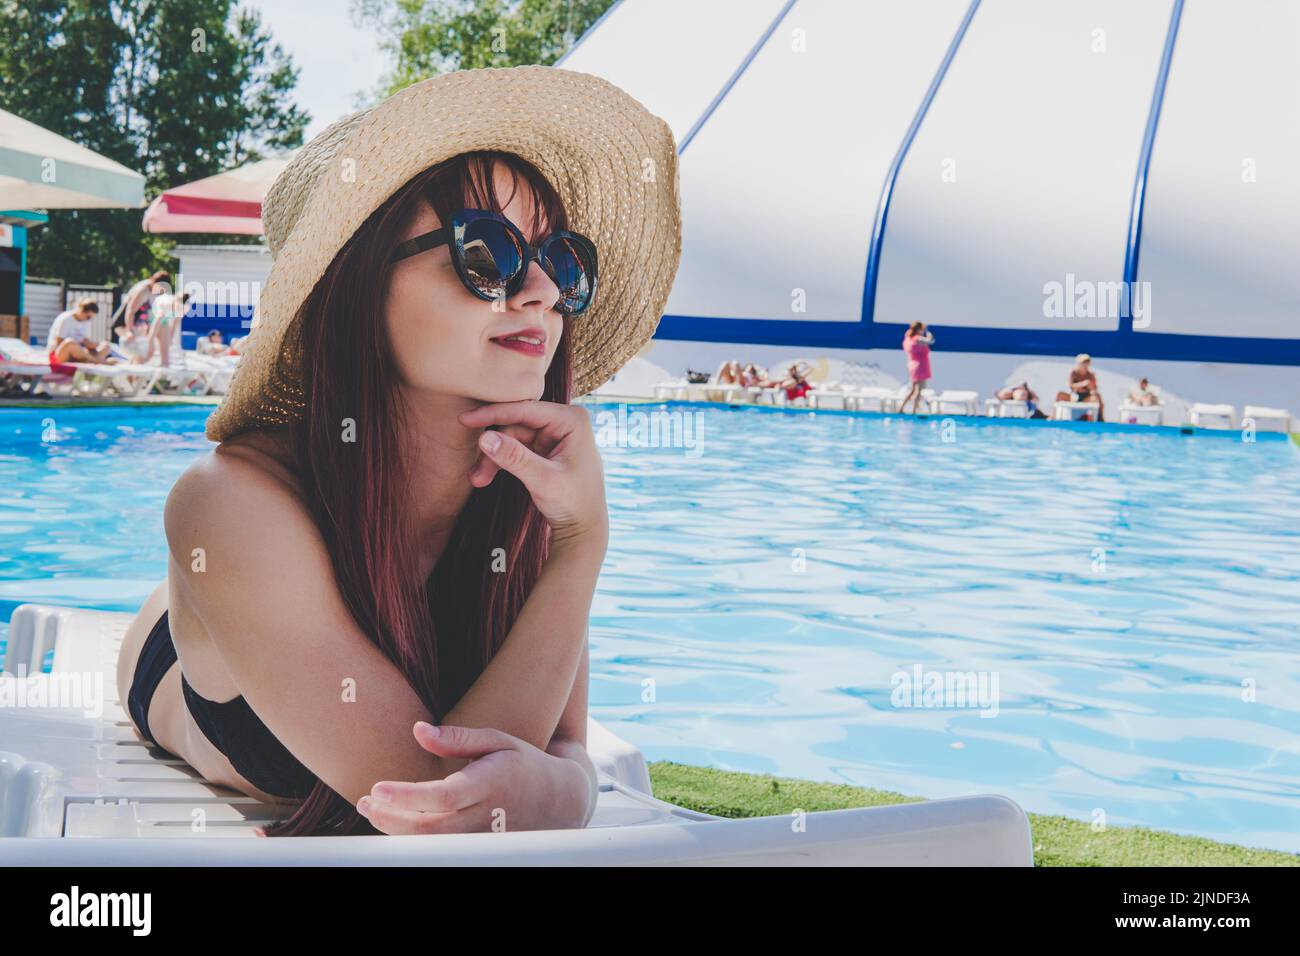 Woman Summer Fashion. Happy Sexy Smiling Girl With Fit Body, Healthy Skin In Bikini, Sun Hat, Sunglasses Sunbathing By Swimming Pool On Travel Holiday Stock Photo